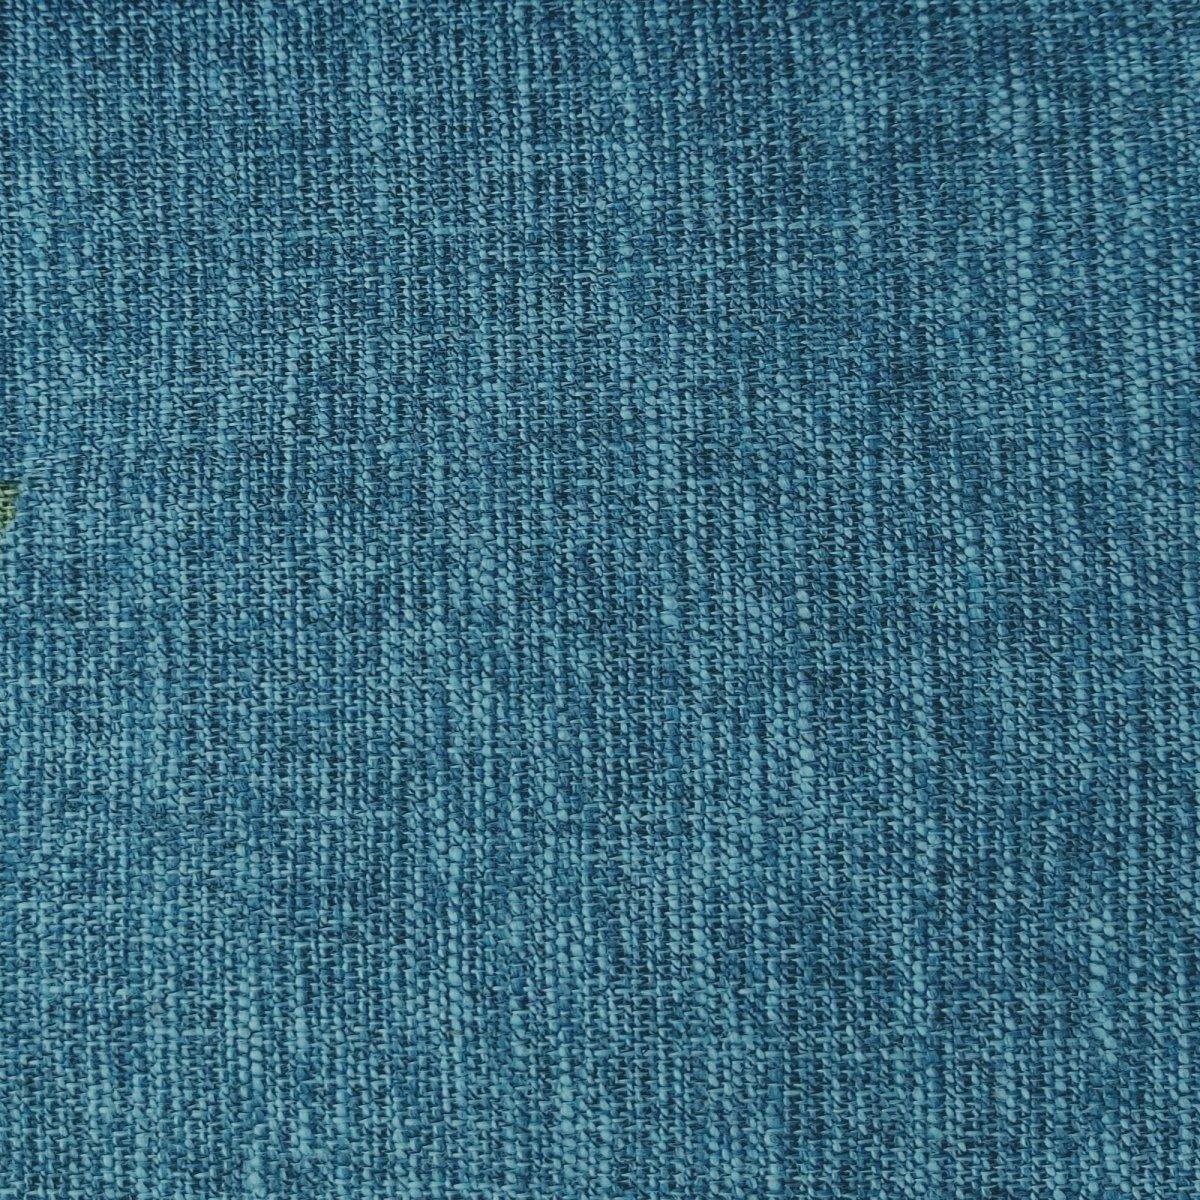 Tweed Upholstery Fabric Granville Teal Mix